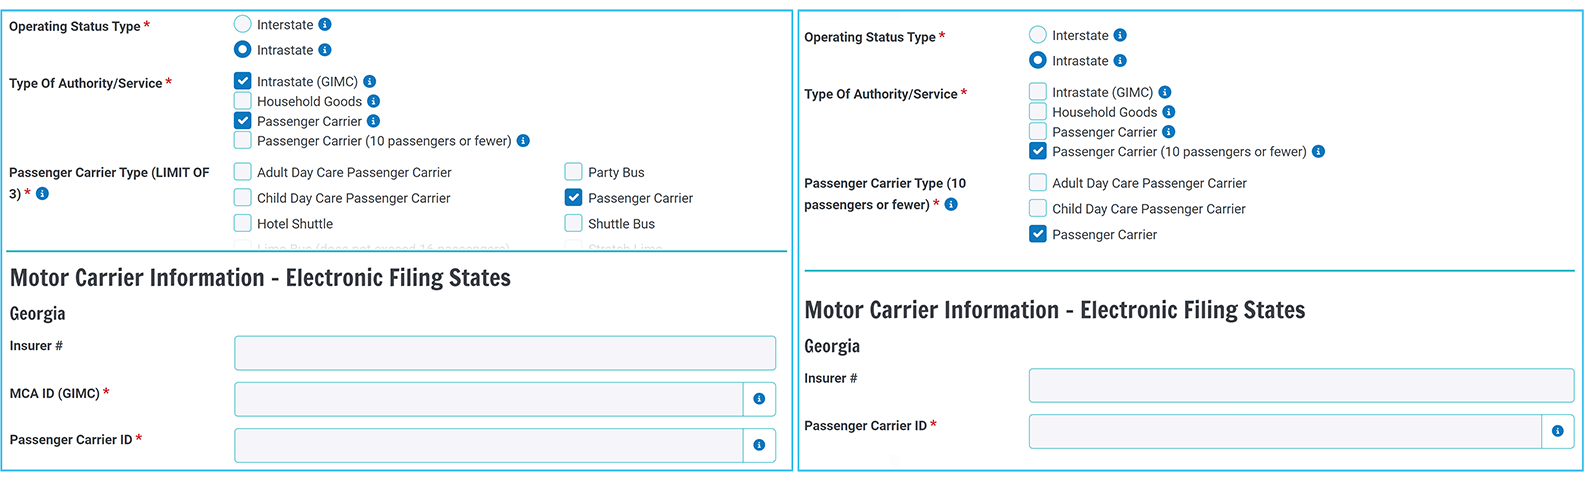 Graphic showing interface for regular Passenger Carrier vs Passenger Carrier 10 or fewer with no GIMC field to complete